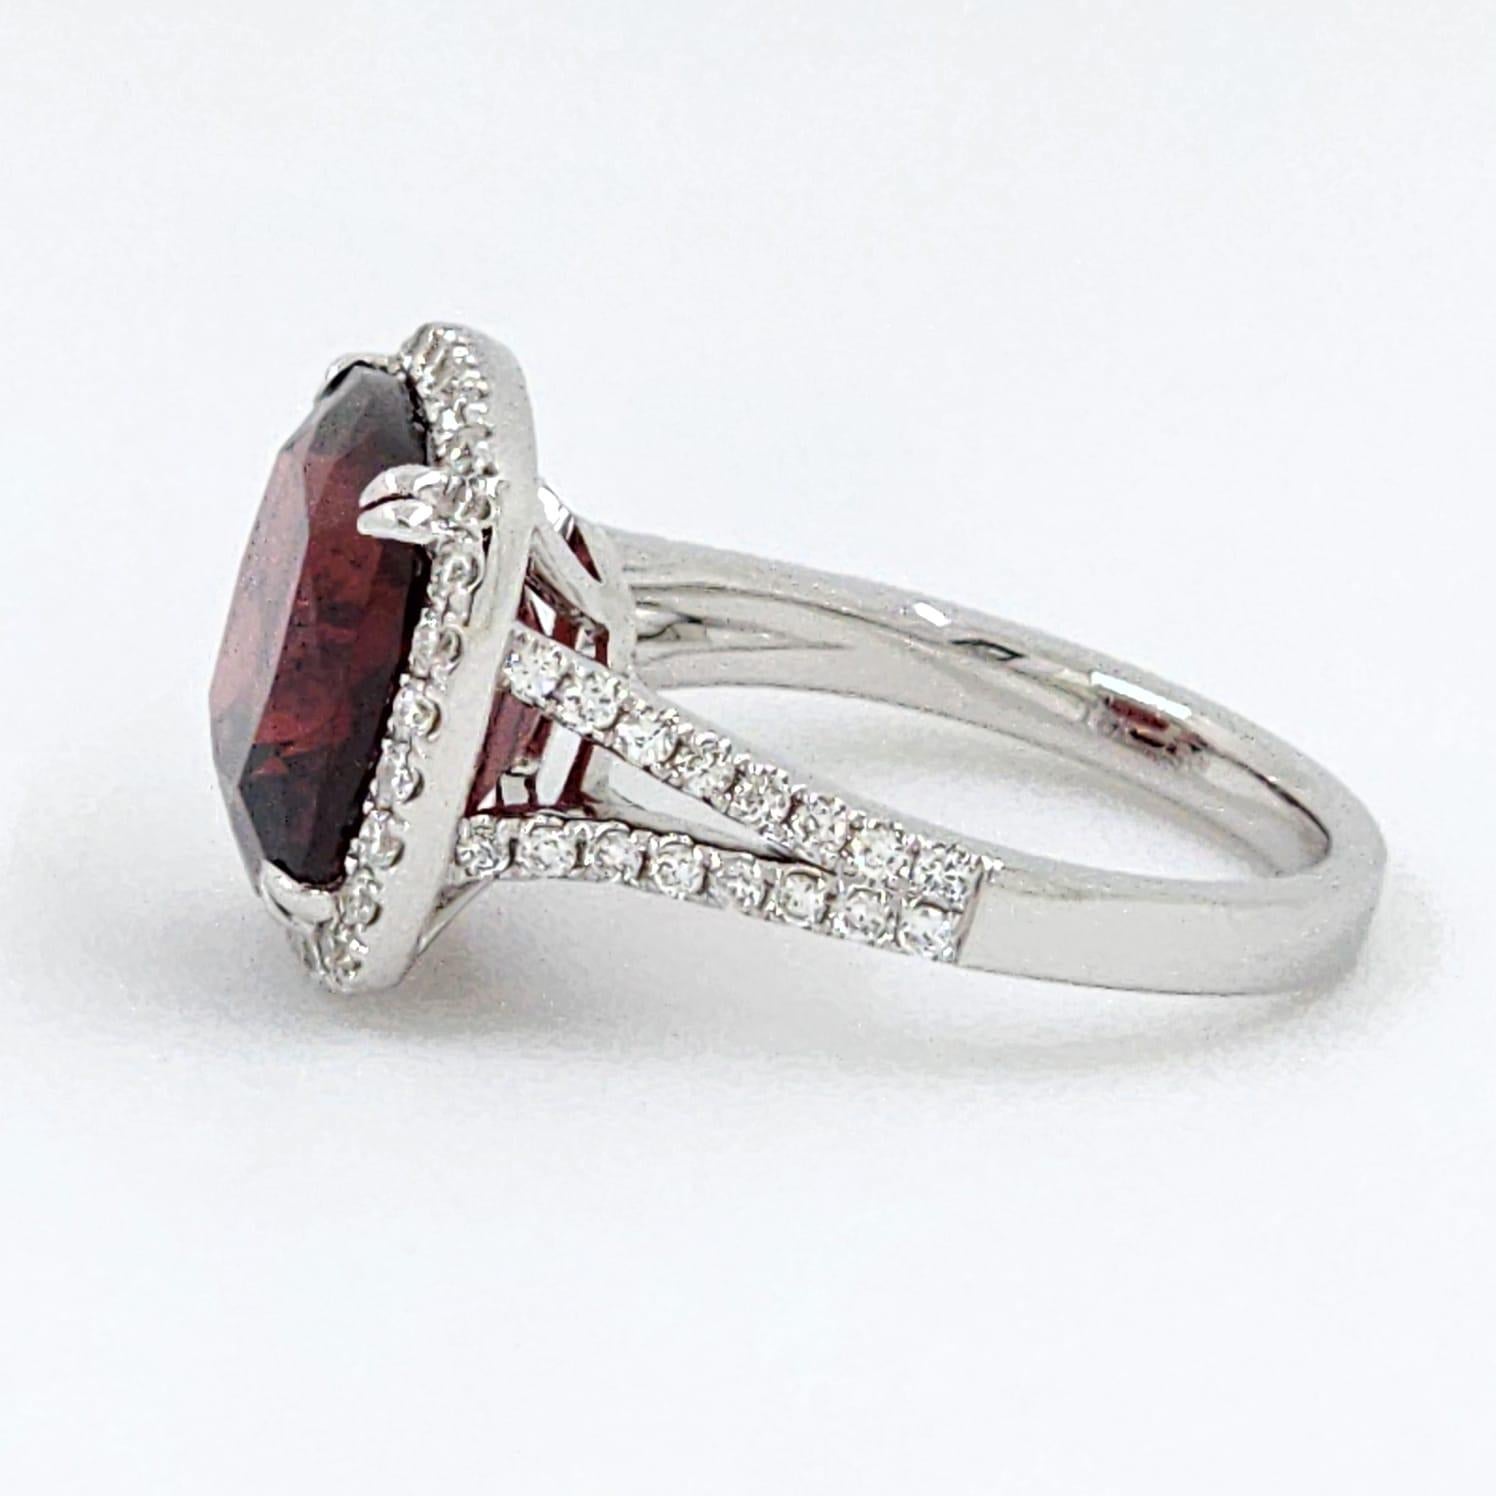 Cushion Cut GIA Certified 8.15 Carat Garnet and Diamond Ring in 18K White Gold For Sale